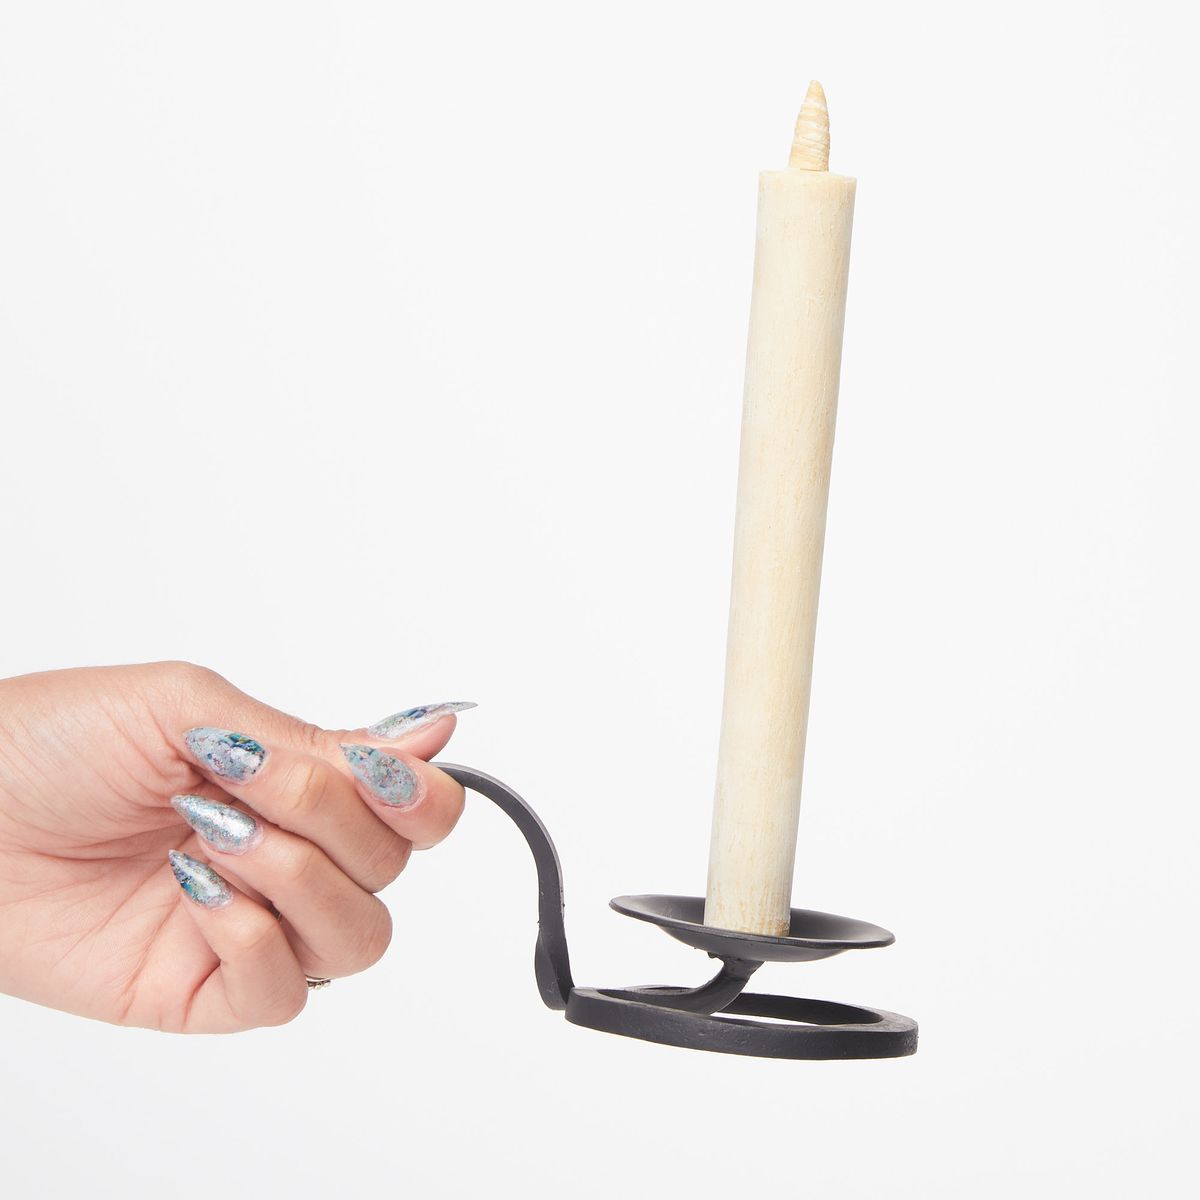 Hand holding a black cast iron candle holder with a circular base containing a tall cream candle